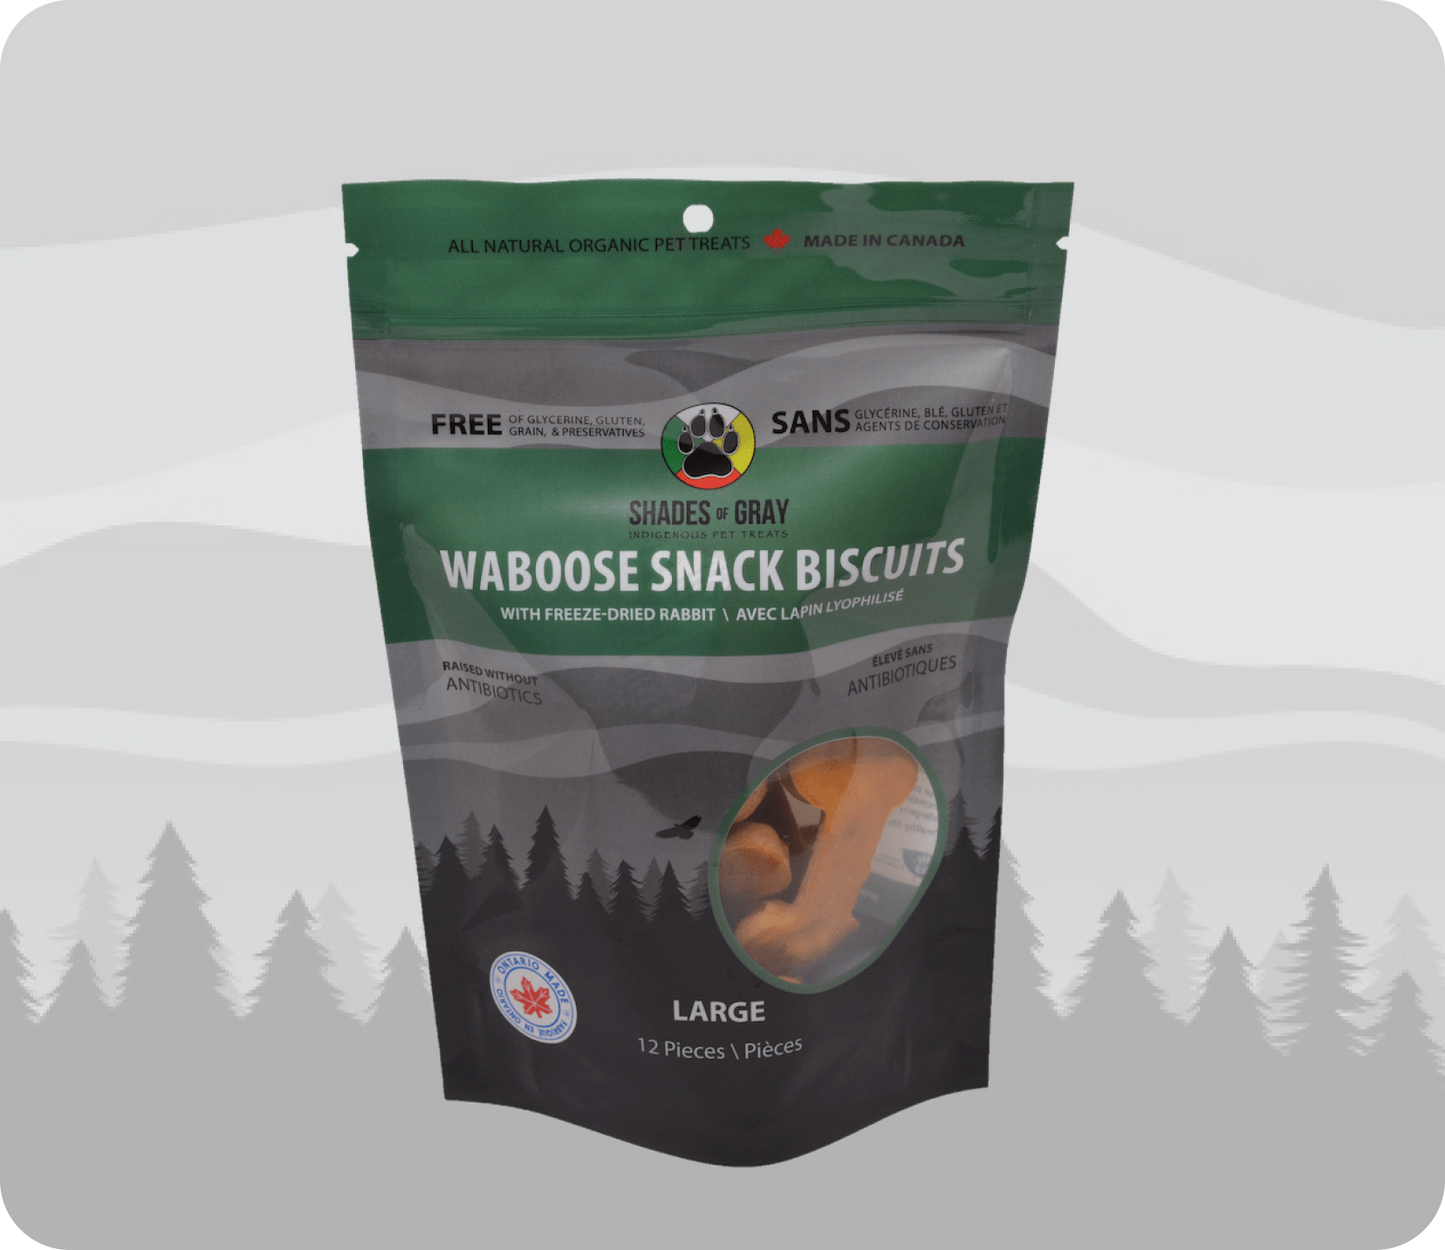 Waboose Snack Biscuit pet treats made with organic all natural Rabbit, chickpea flour and apple cider vinegar for your dogs. Free of Glycerine, Gluten, Grain & Preservatives.